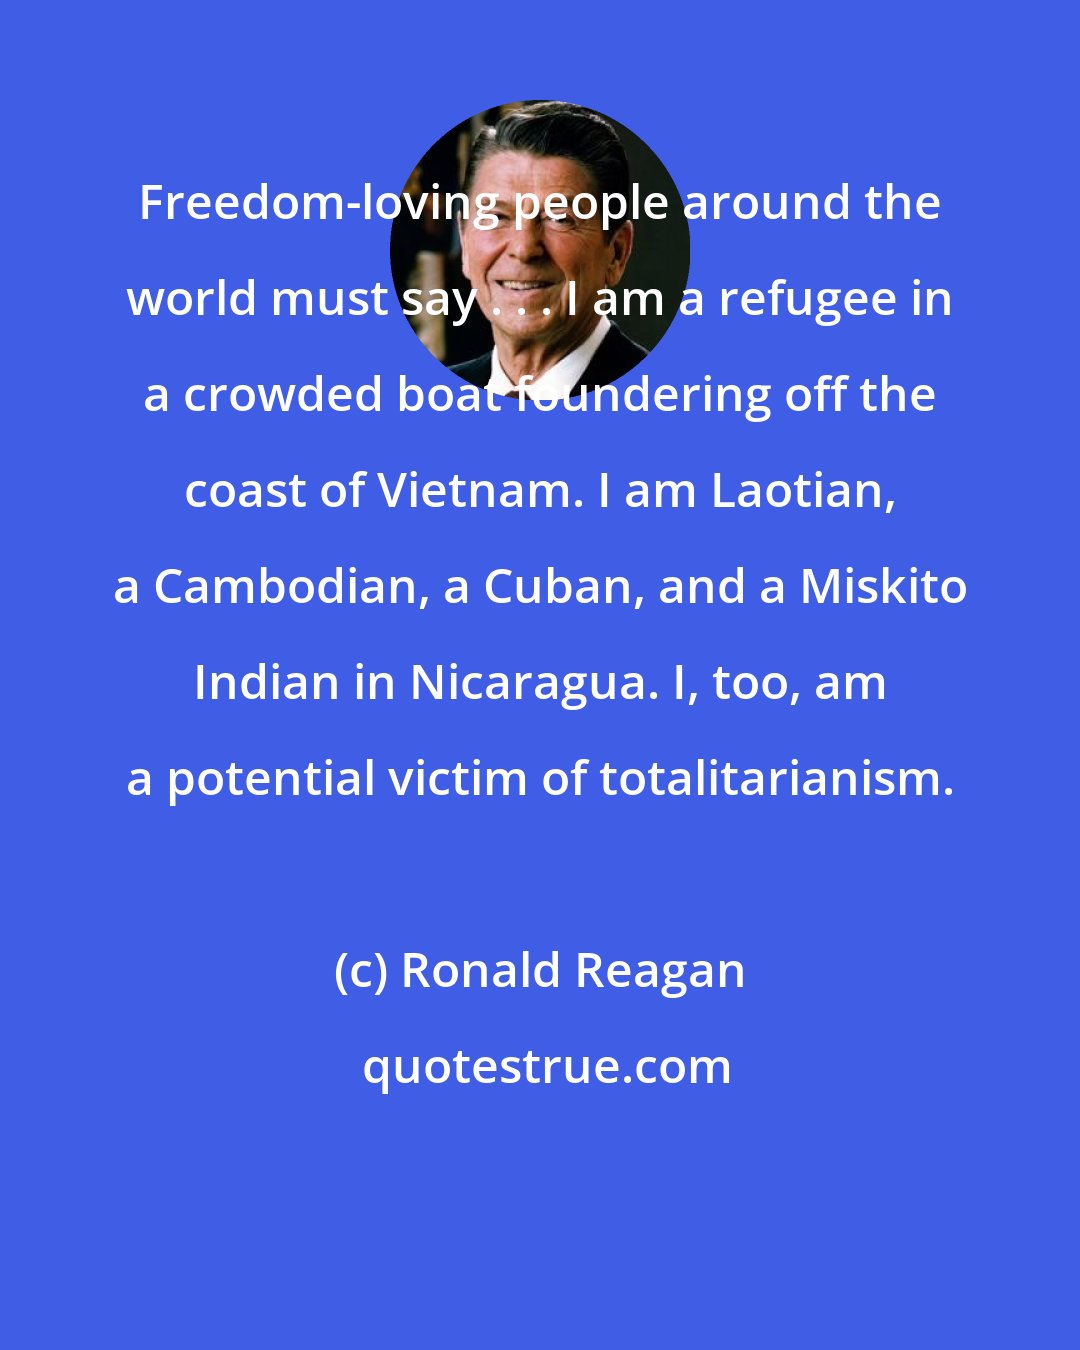 Ronald Reagan: Freedom-loving people around the world must say . . . I am a refugee in a crowded boat foundering off the coast of Vietnam. I am Laotian, a Cambodian, a Cuban, and a Miskito Indian in Nicaragua. I, too, am a potential victim of totalitarianism.